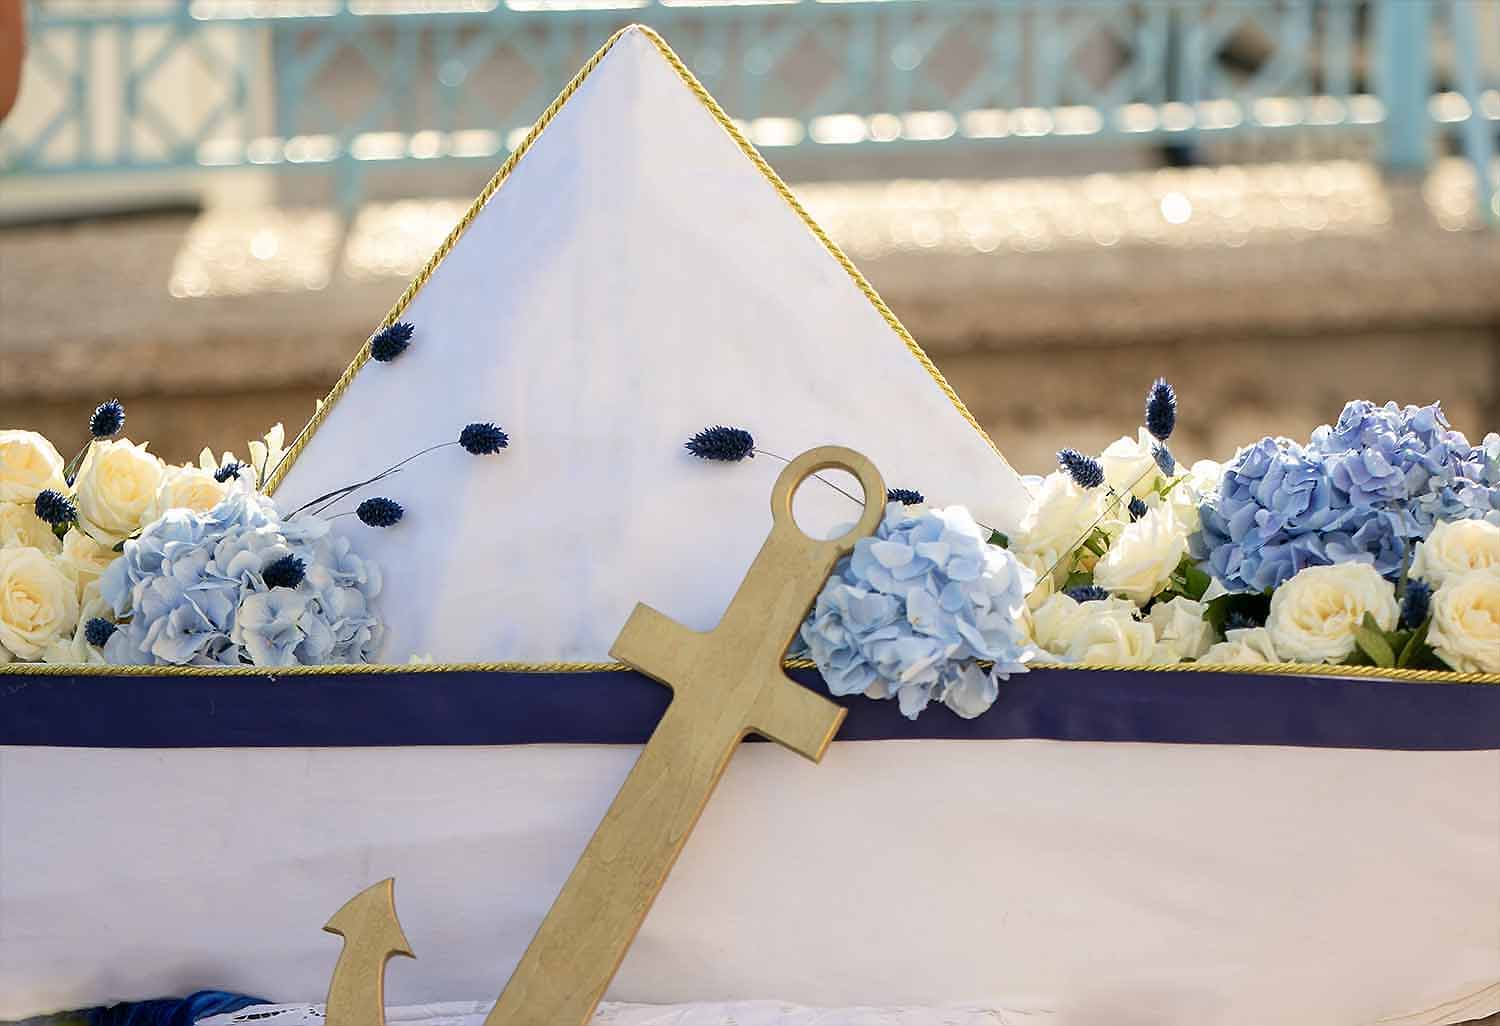 A handmade boat made out of white fabrics decorated with natural white and blue flowers and a wooden gold anchor